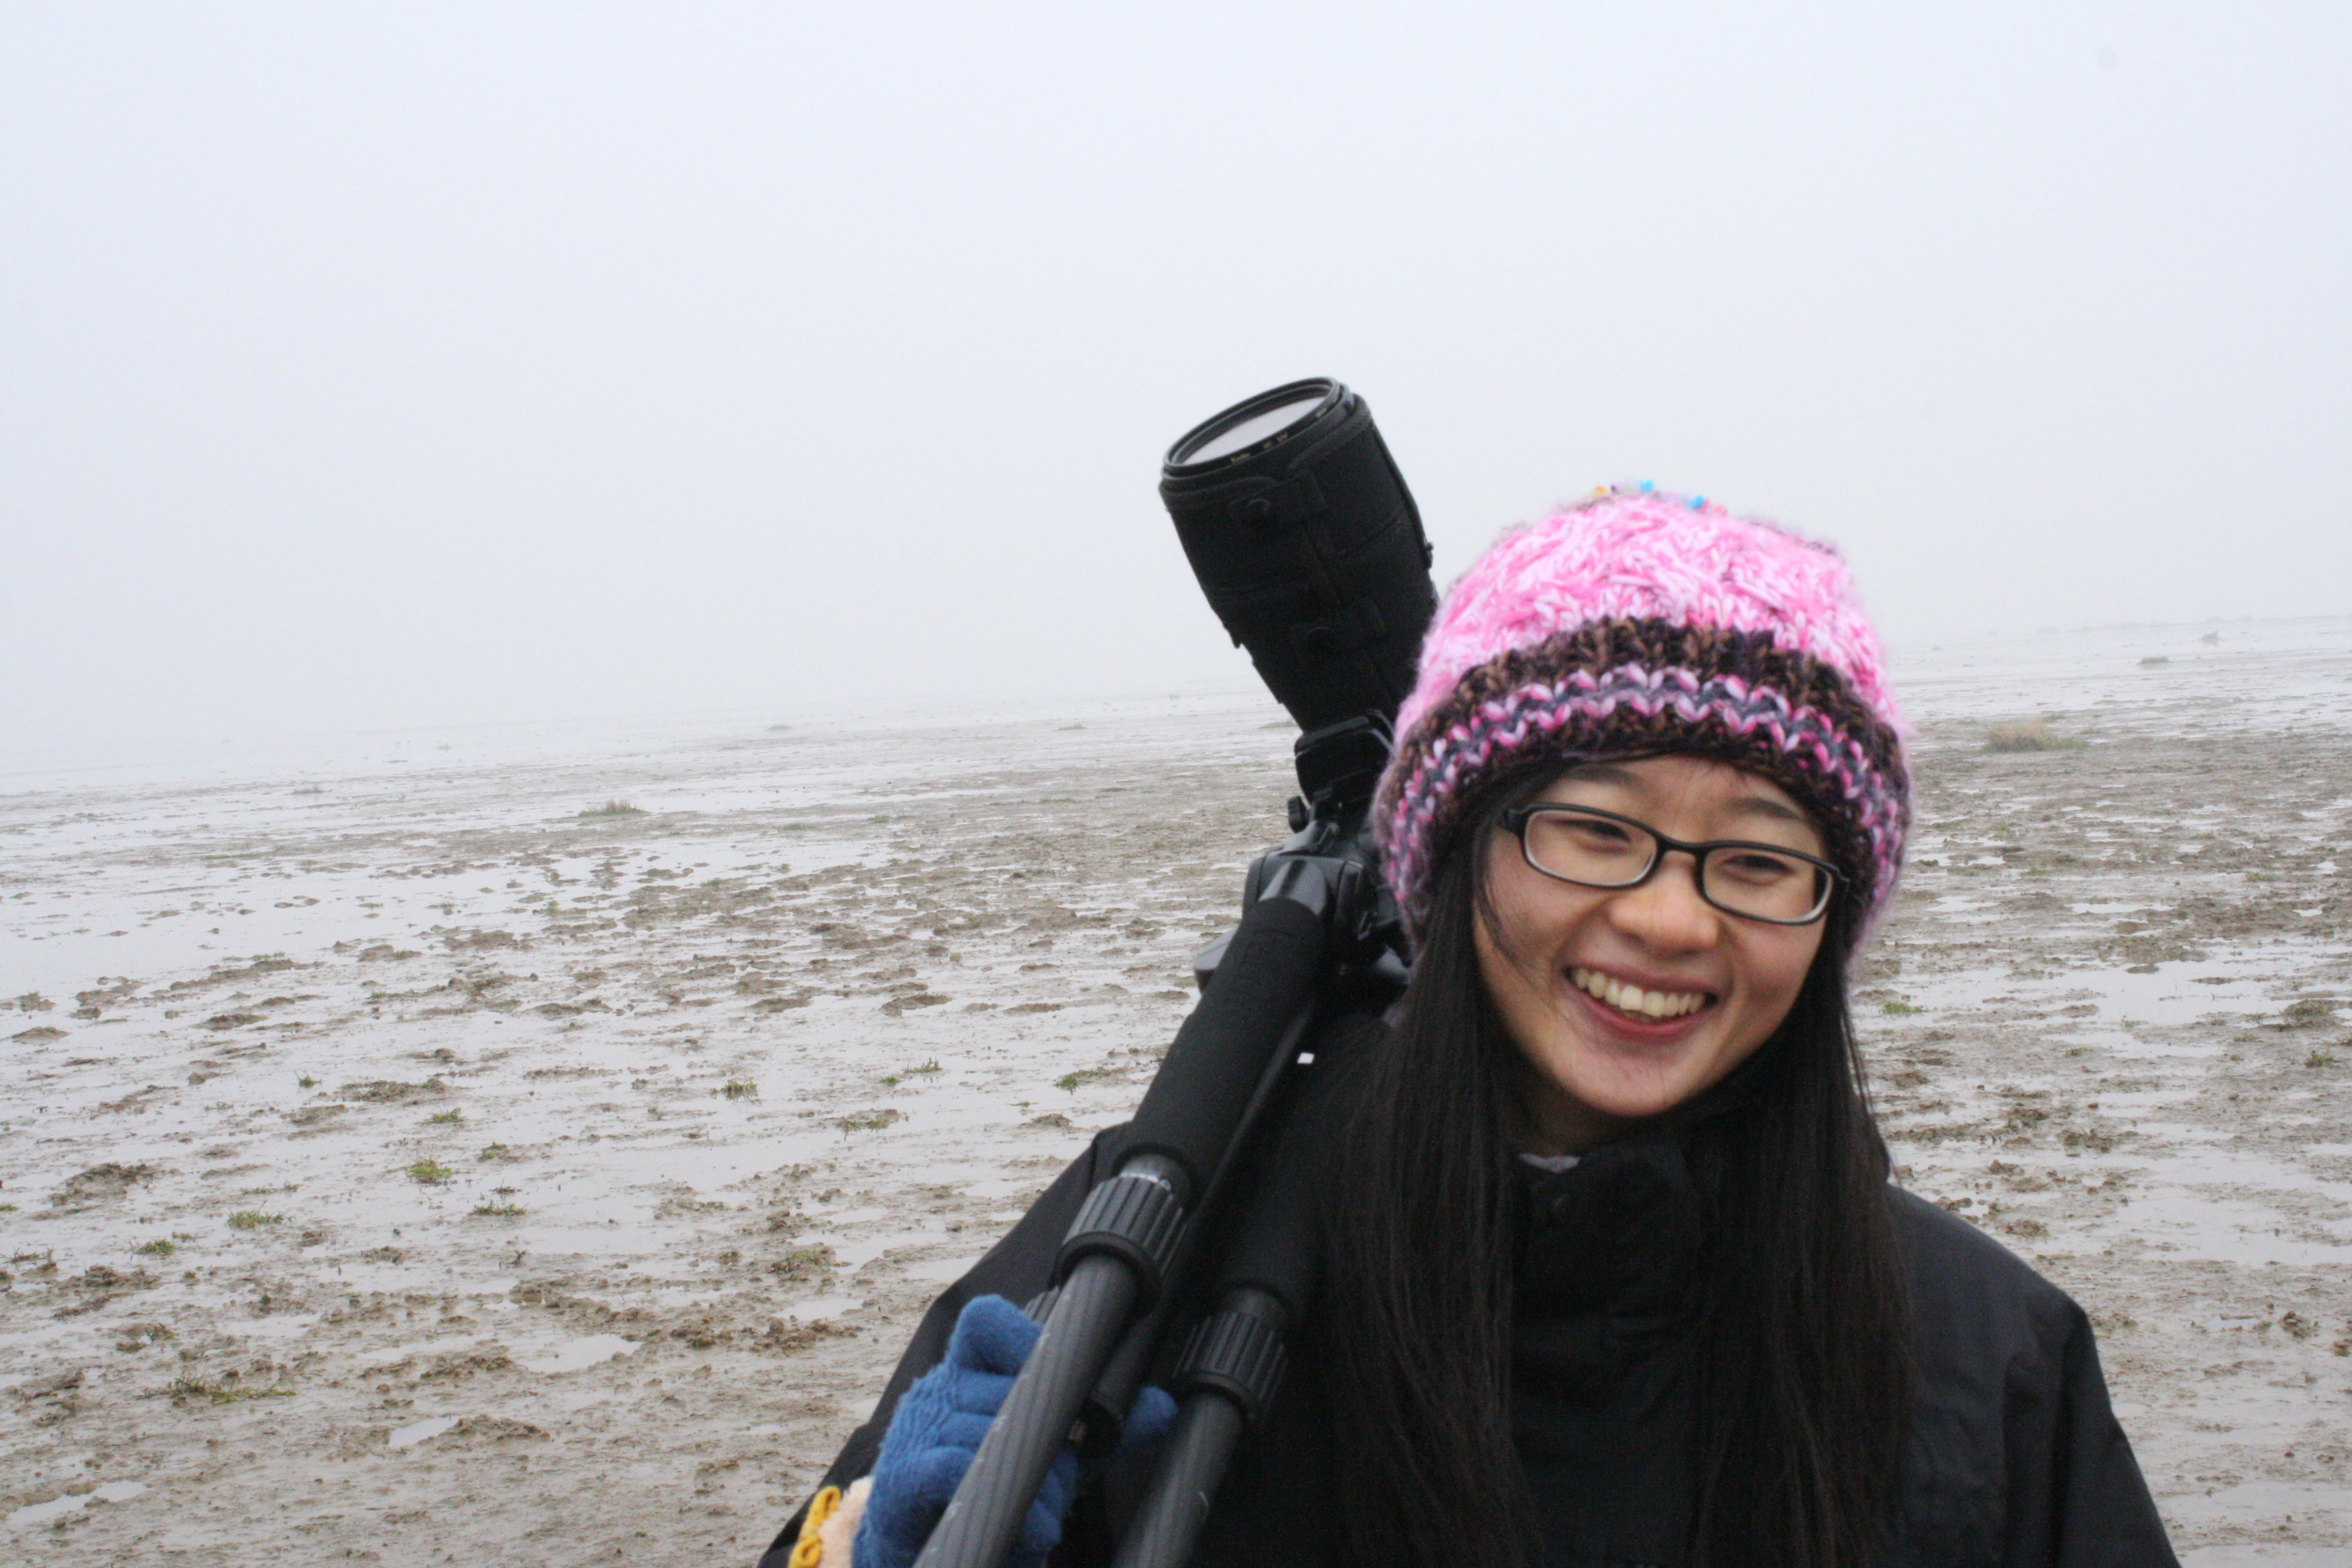 A woman holding a spotting scope stands on a mud flat